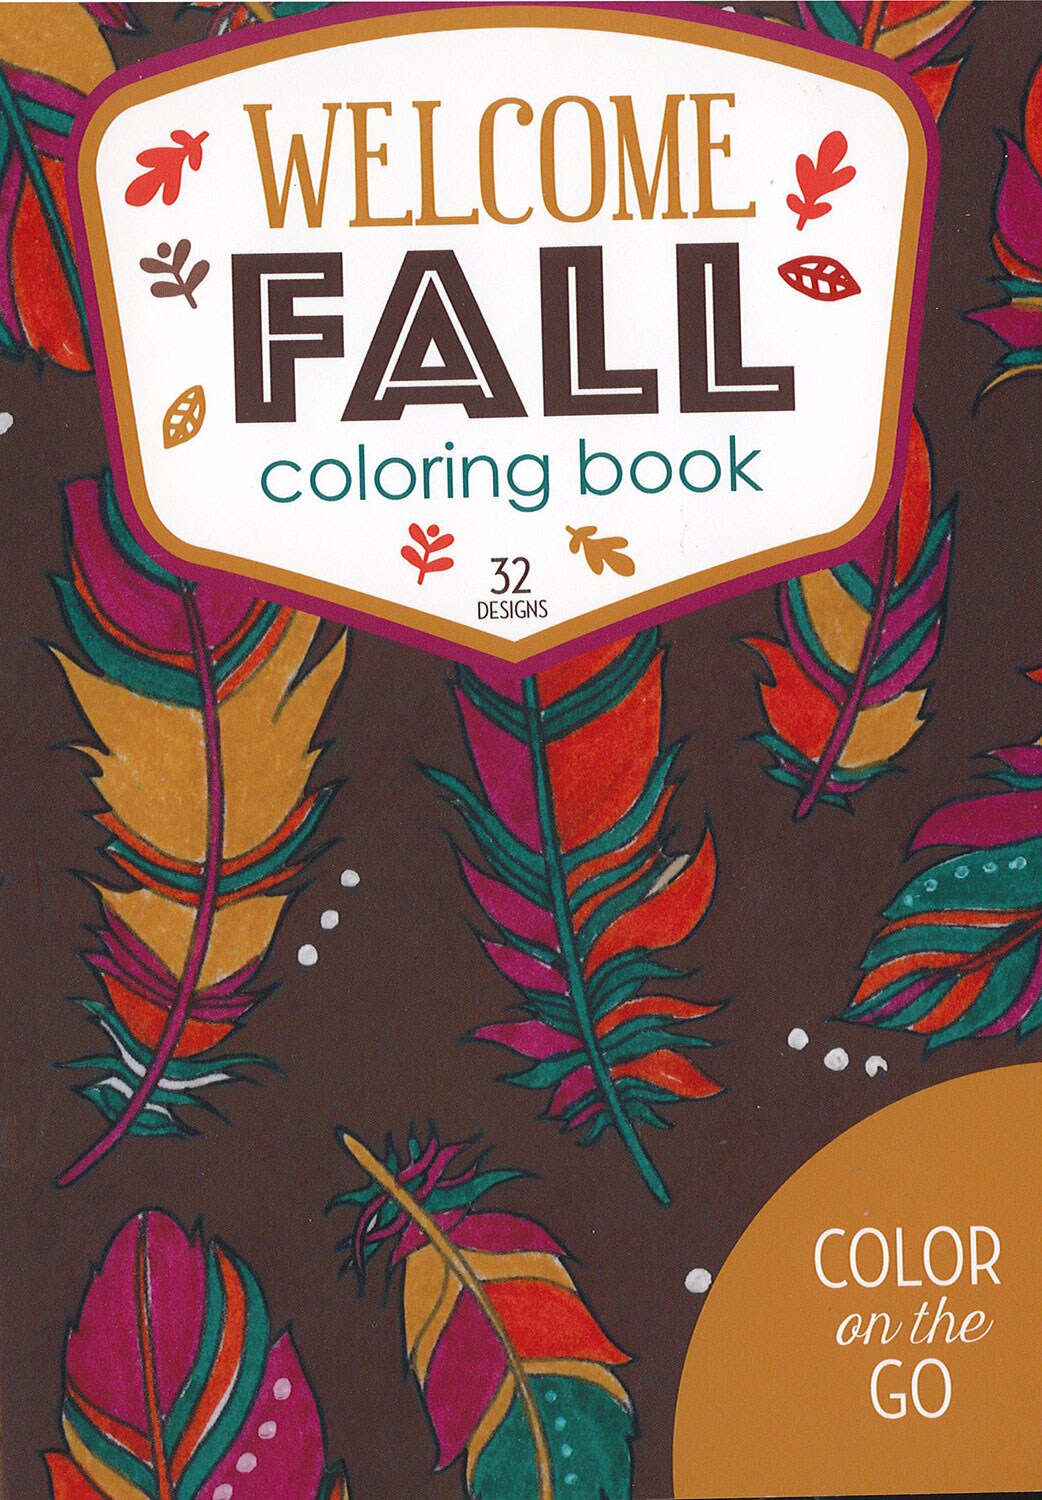 Leisure Arts Color Go Welcome Fall Coloring Book